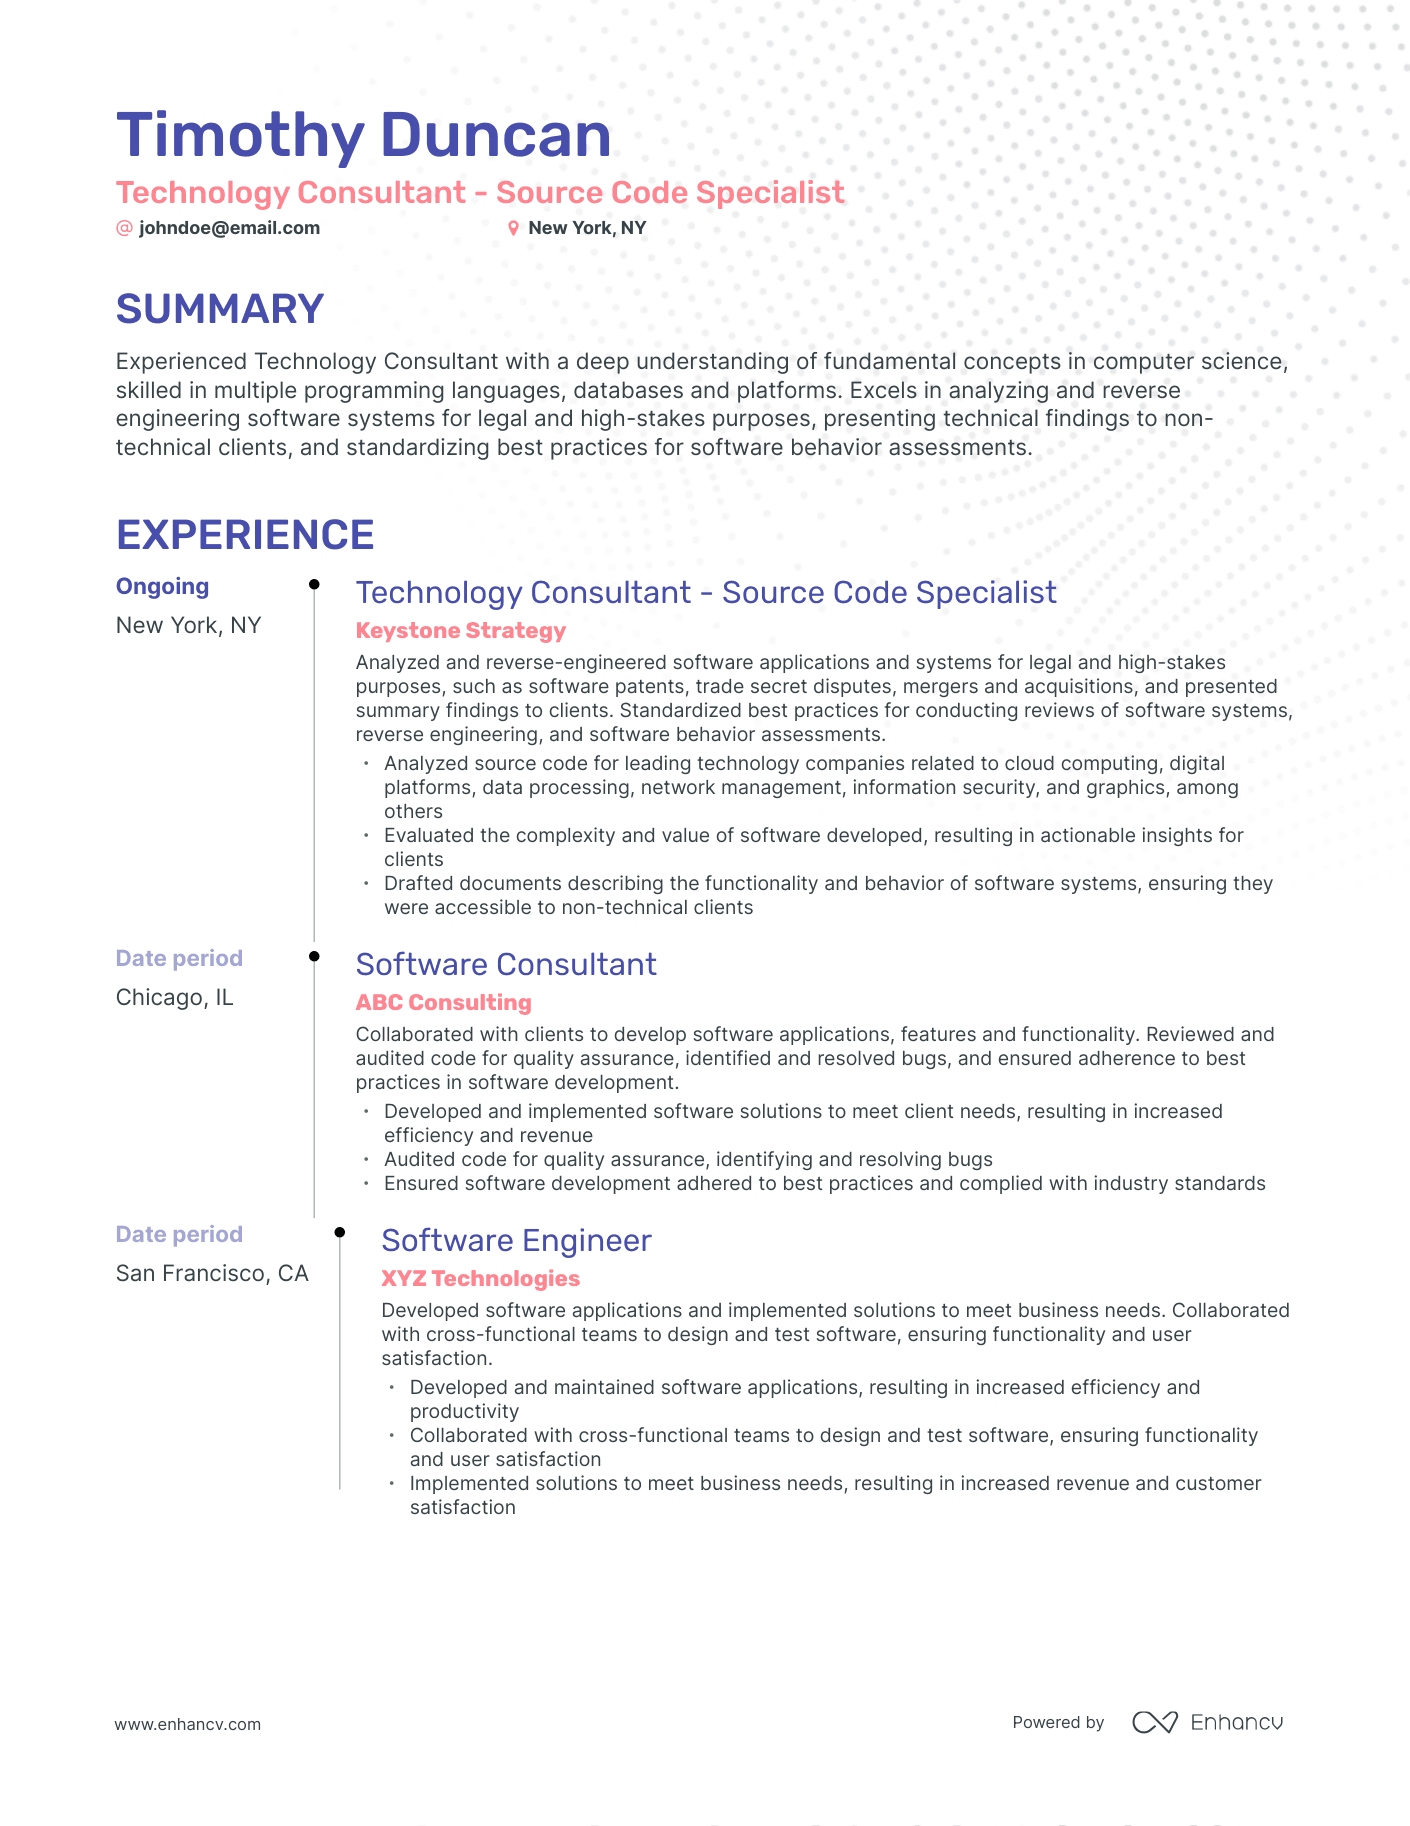 Timeline Technology Consultant Resume Template